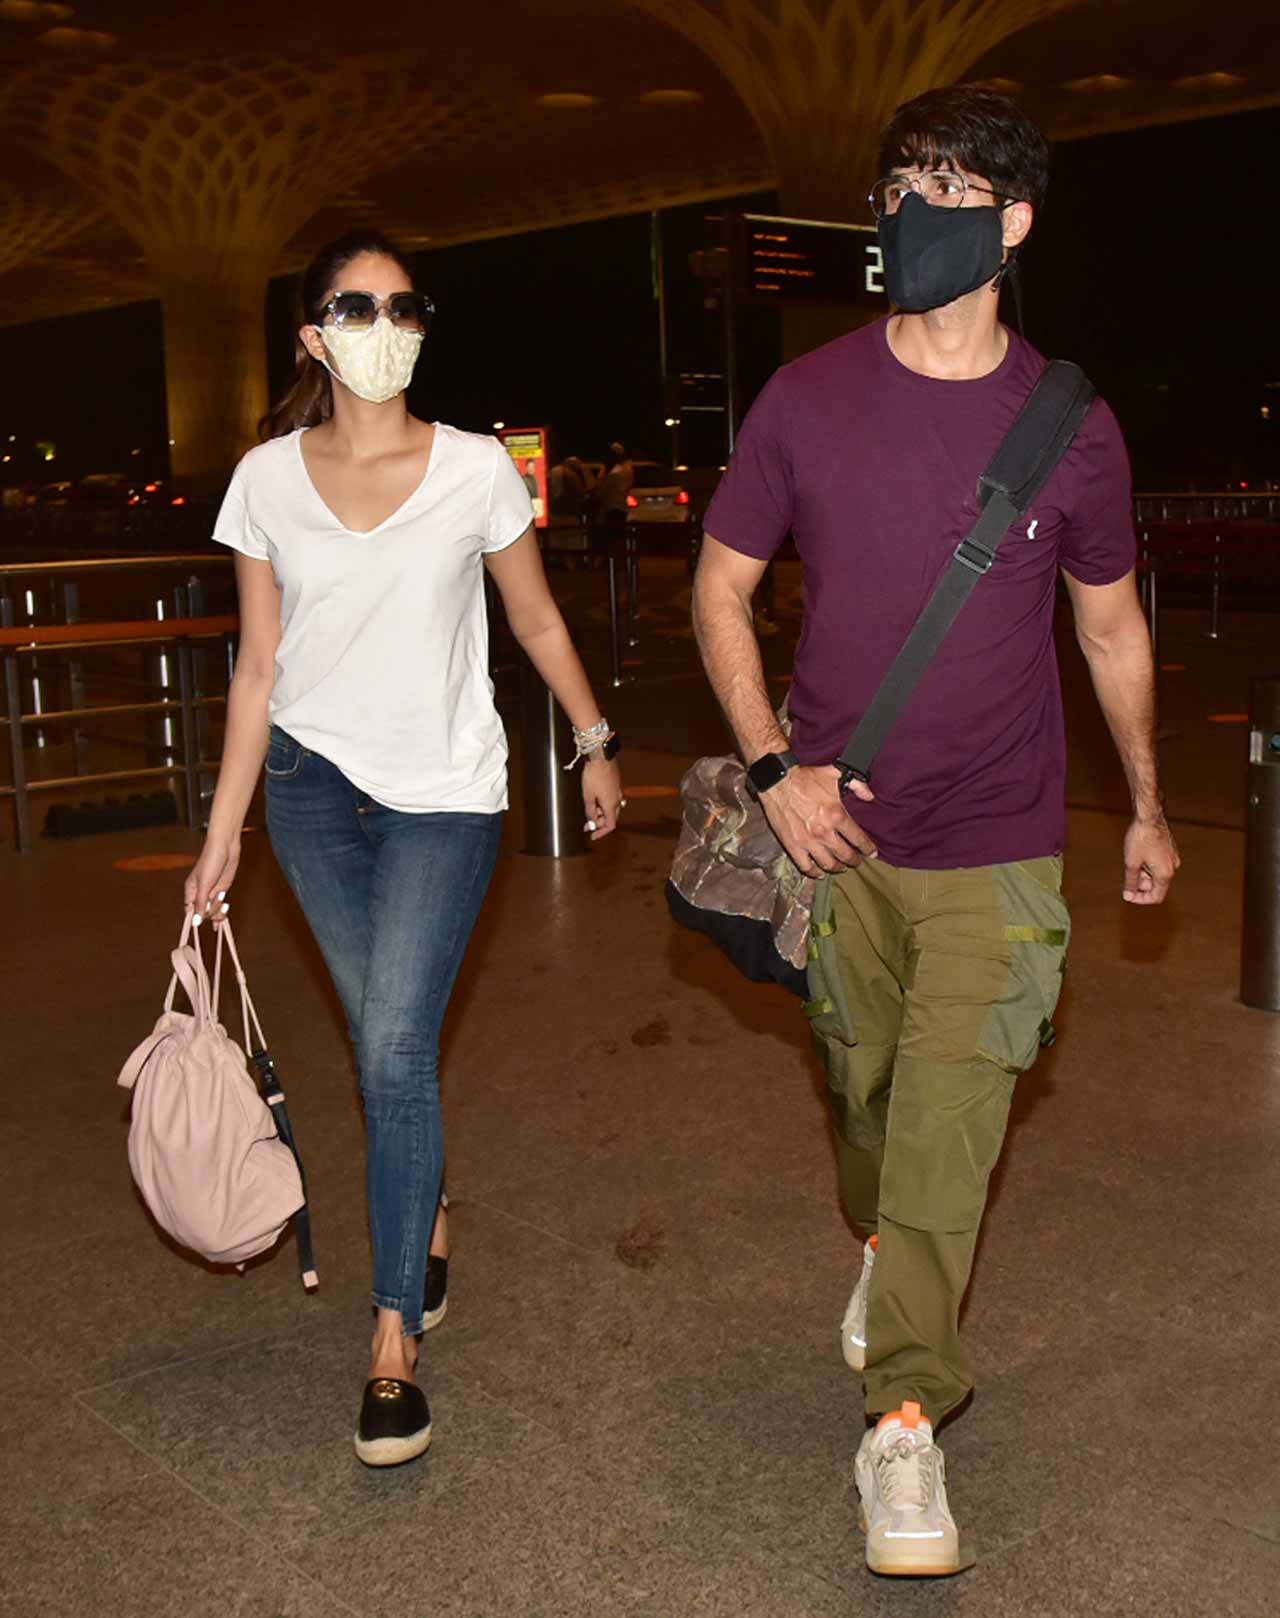 Mira Kapoor and Shahid Kapoor were also spotted at the Mumbai airport. The duo left for a small vacation to Goa. On the work front, Shahid will be next seen in Jersey, opposite Mrunal Thakur.